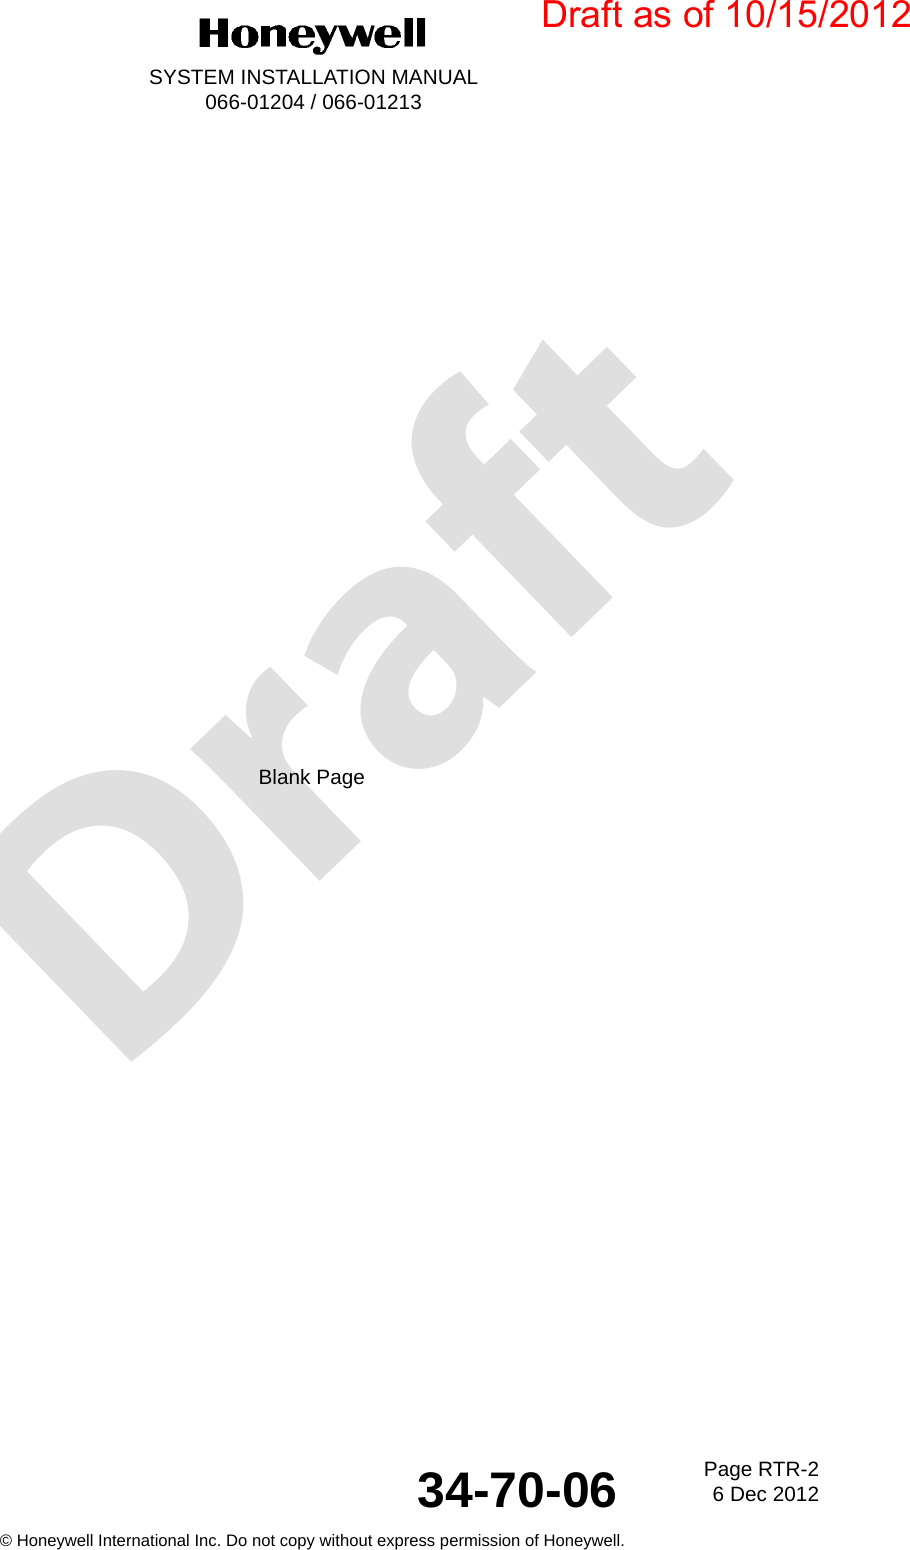 DraftPage RTR-26 Dec 201234-70-06SYSTEM INSTALLATION MANUAL066-01204 / 066-01213© Honeywell International Inc. Do not copy without express permission of Honeywell.Blank PageDraft as of 10/15/2012